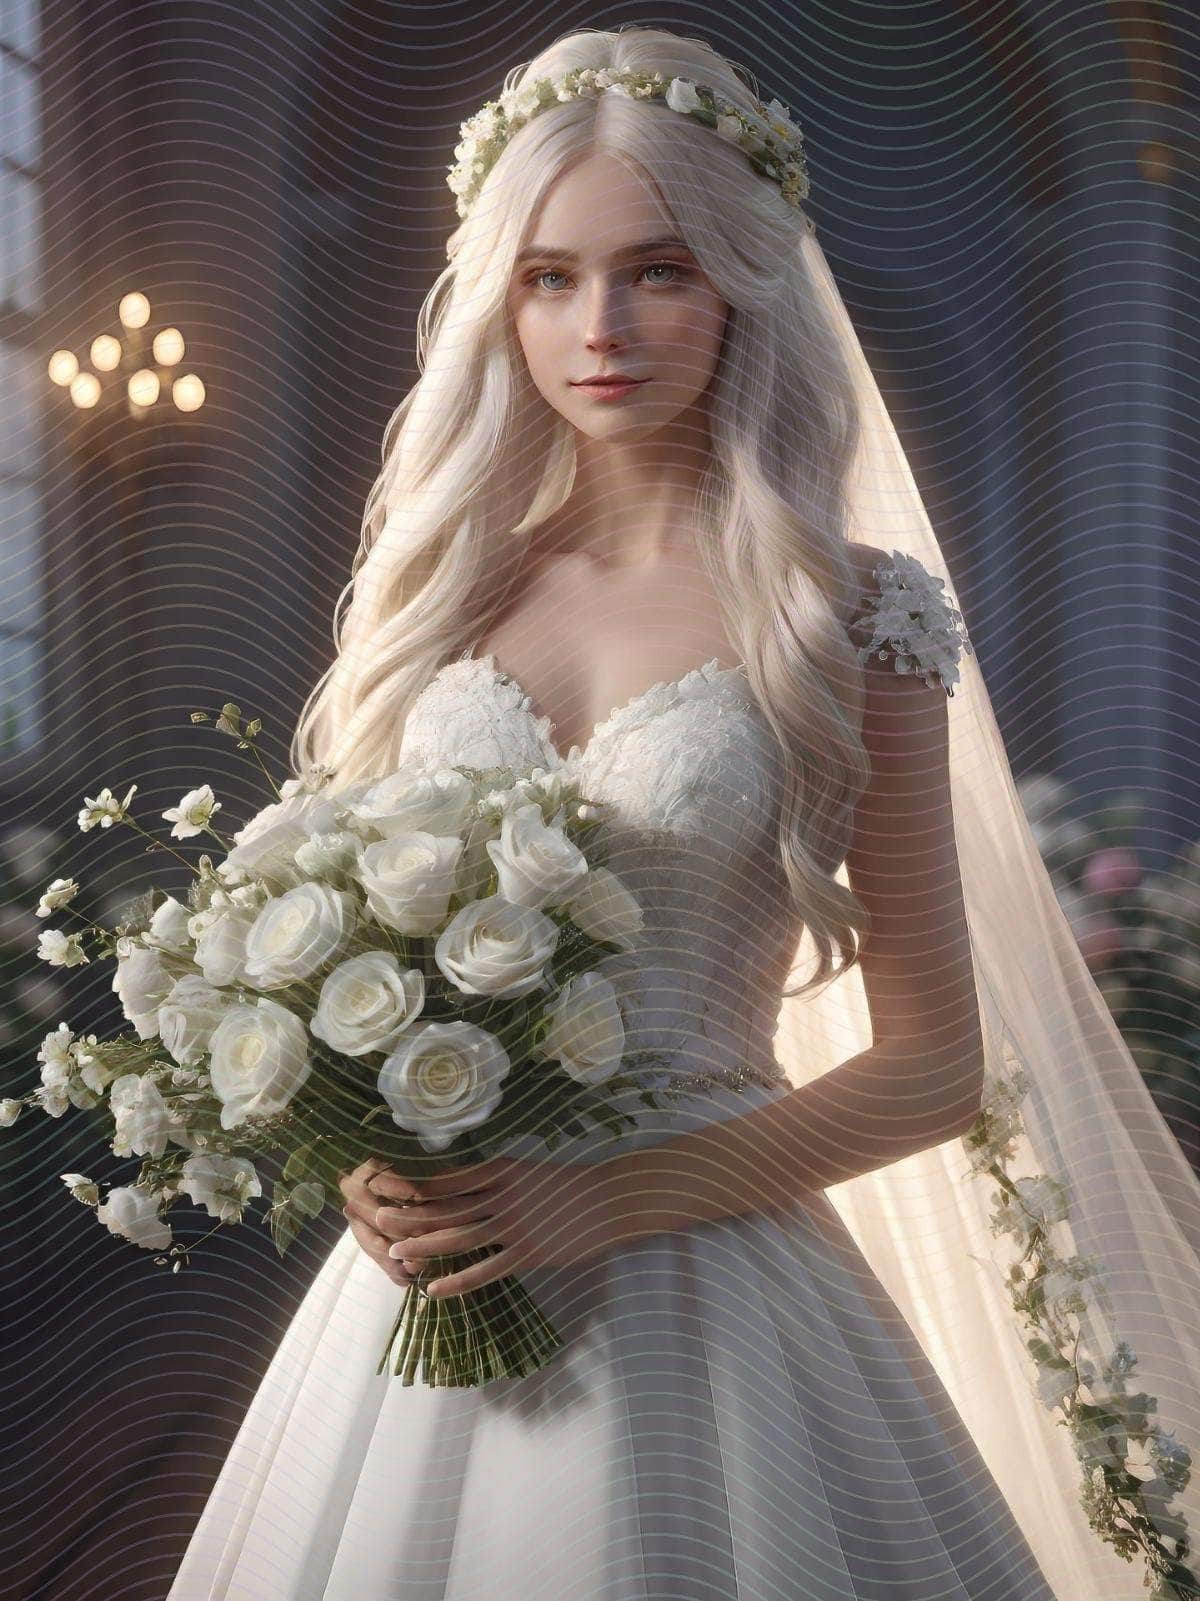 A Blonde Haired Woman Holding a Bouquet